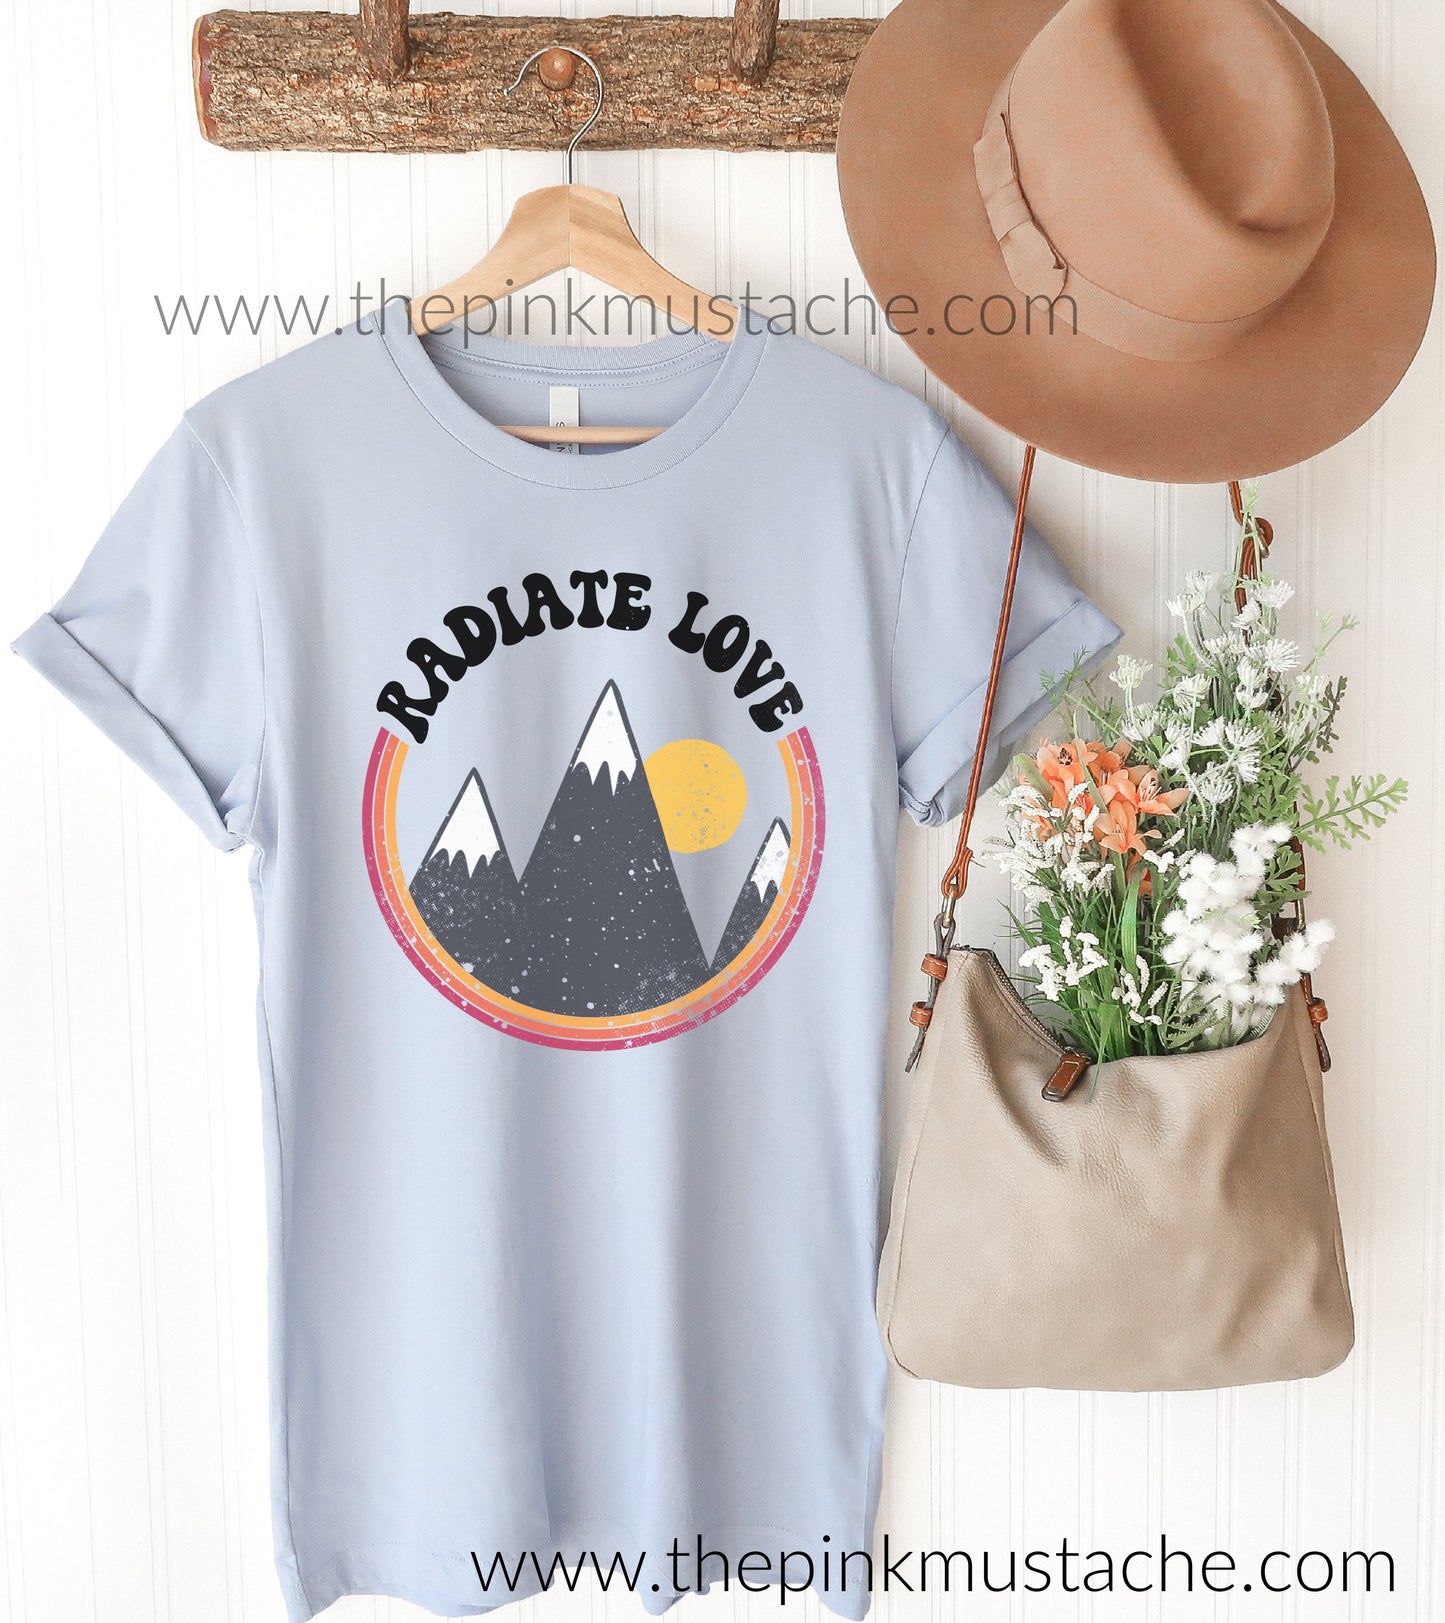 Radiate Love- Retro Vibes Landscape Softstyle Bella Tee / Fun Hippie Vibes Tee/ Youth and Adult Sizing Available